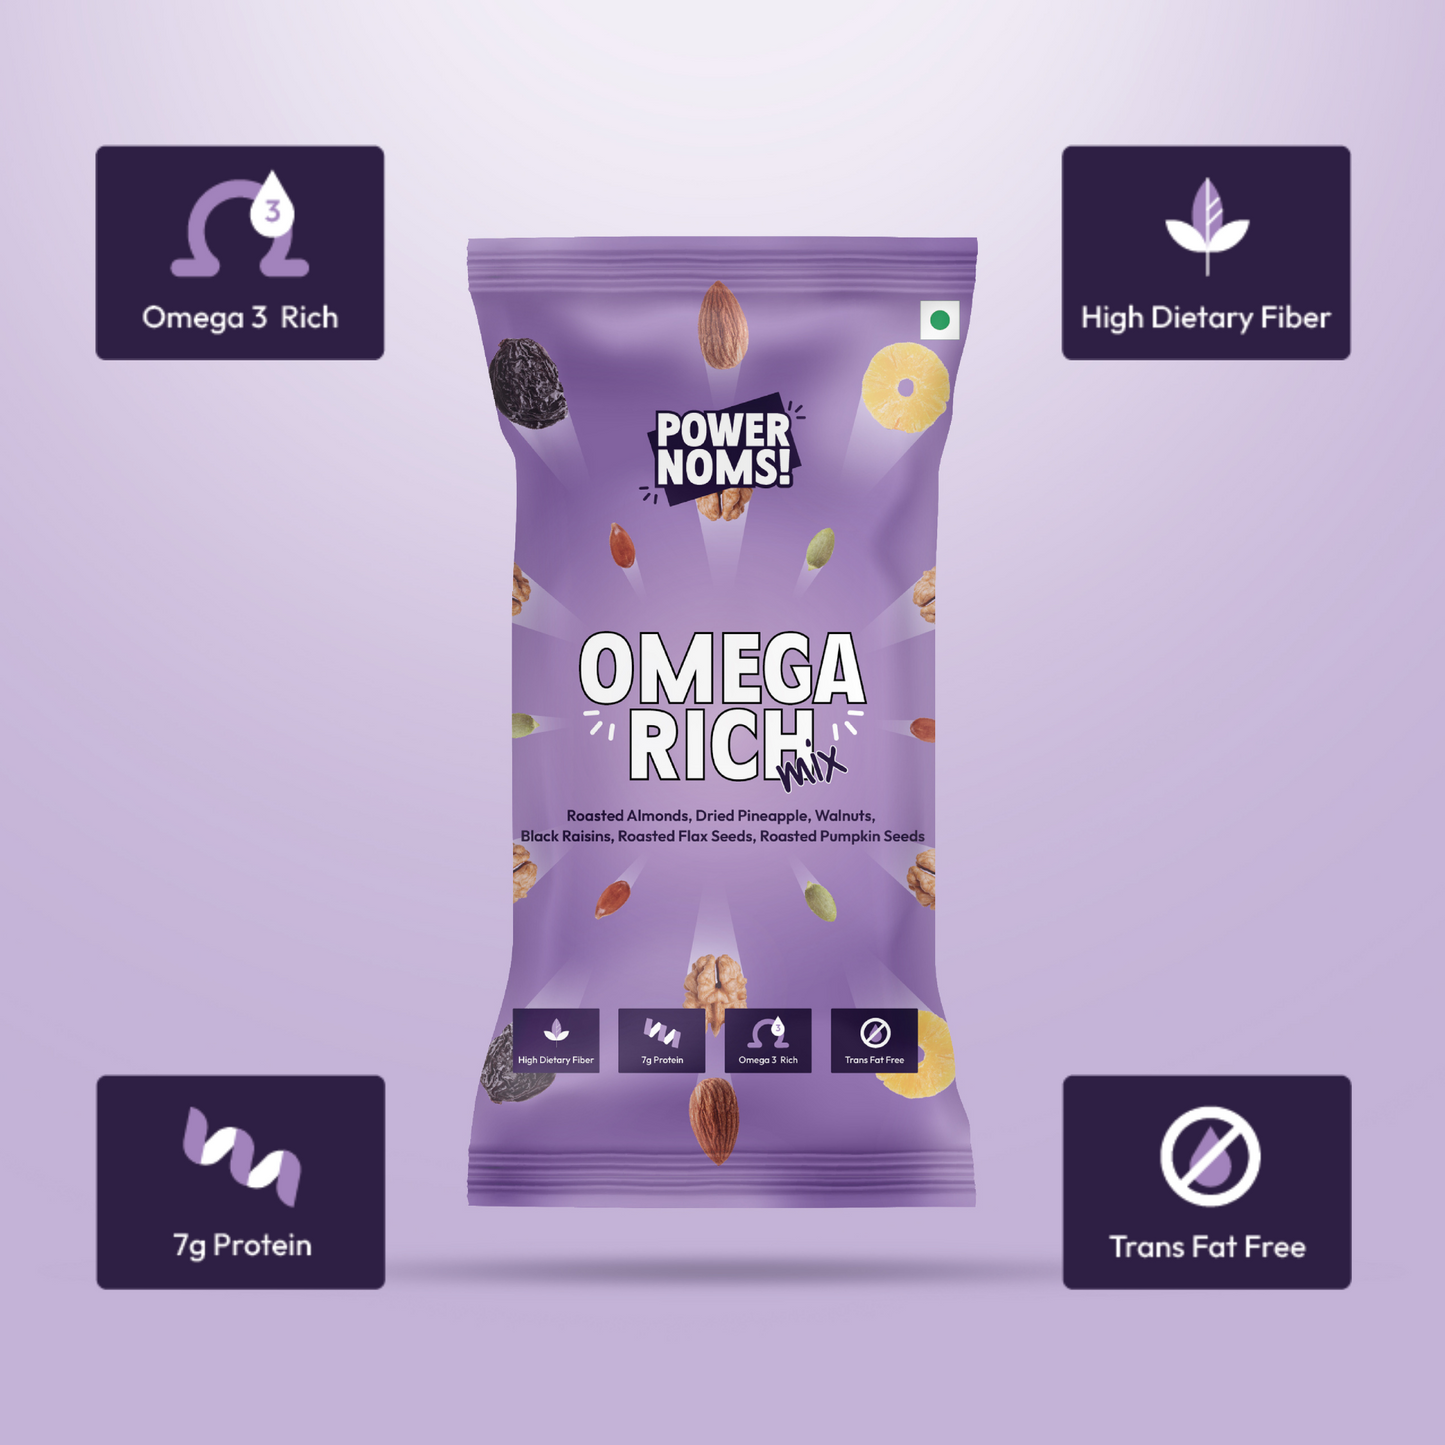 powernoms omega rich mix health features